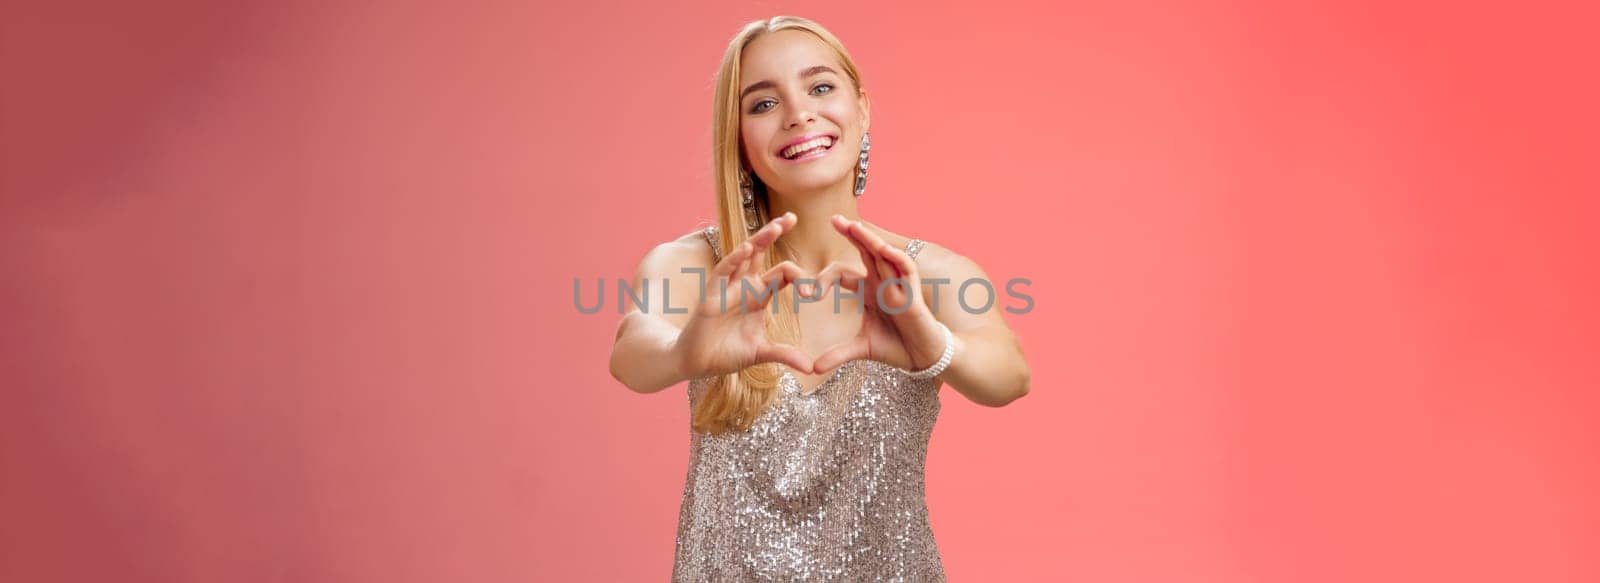 Girl confess she loves you. Portrait charming tender feminine young glamour blond woman in silver stylish glittering dress extend arms camera show heart sign smiling broadly, adore girlfriend.